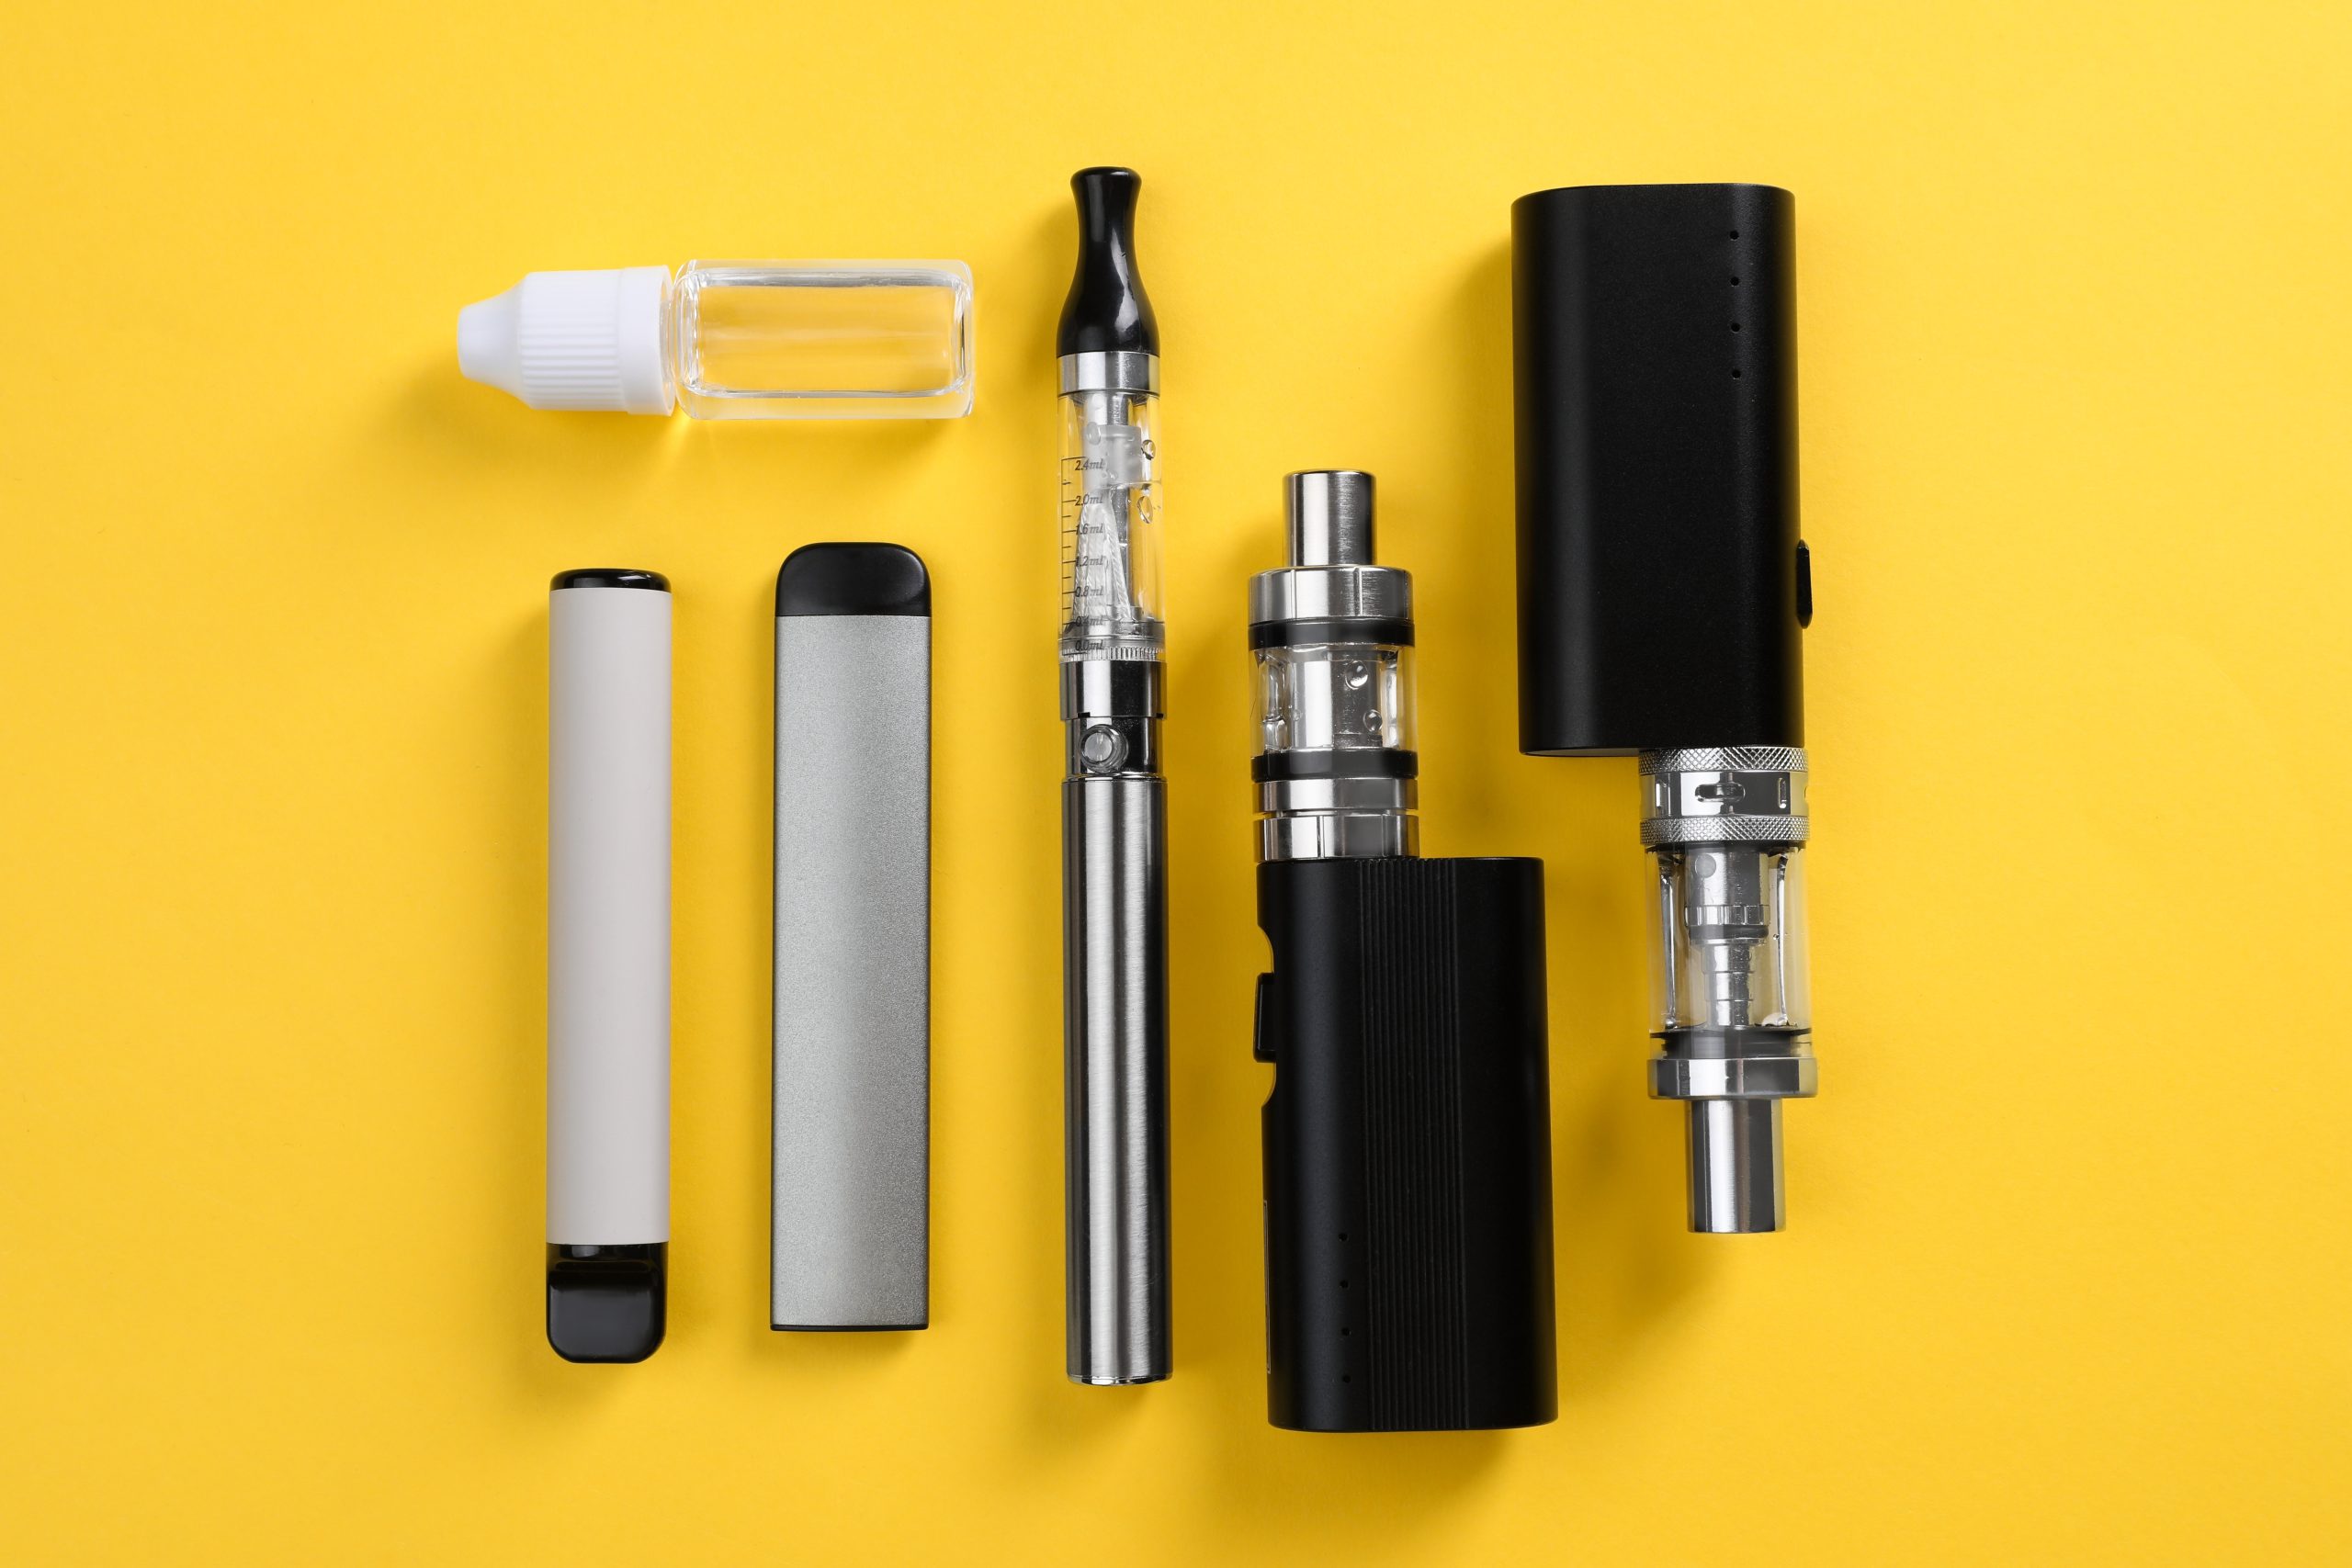 Association of Convenience Stores (ACS) updates vaping guide to help retailers and consumers spot fakes